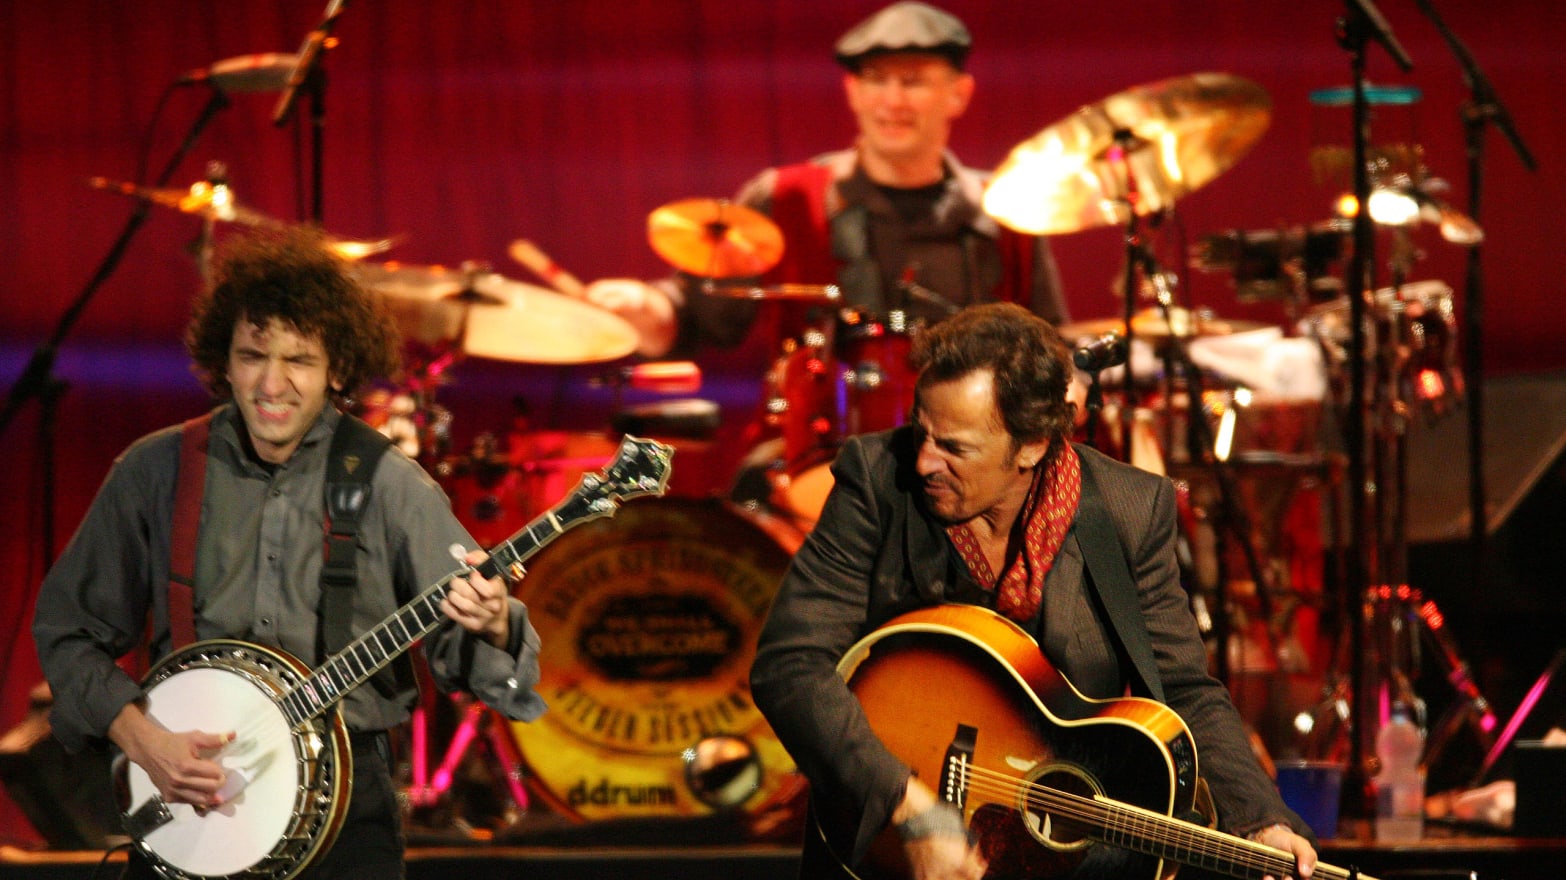 Springsteen & The Seeger Sessions Band